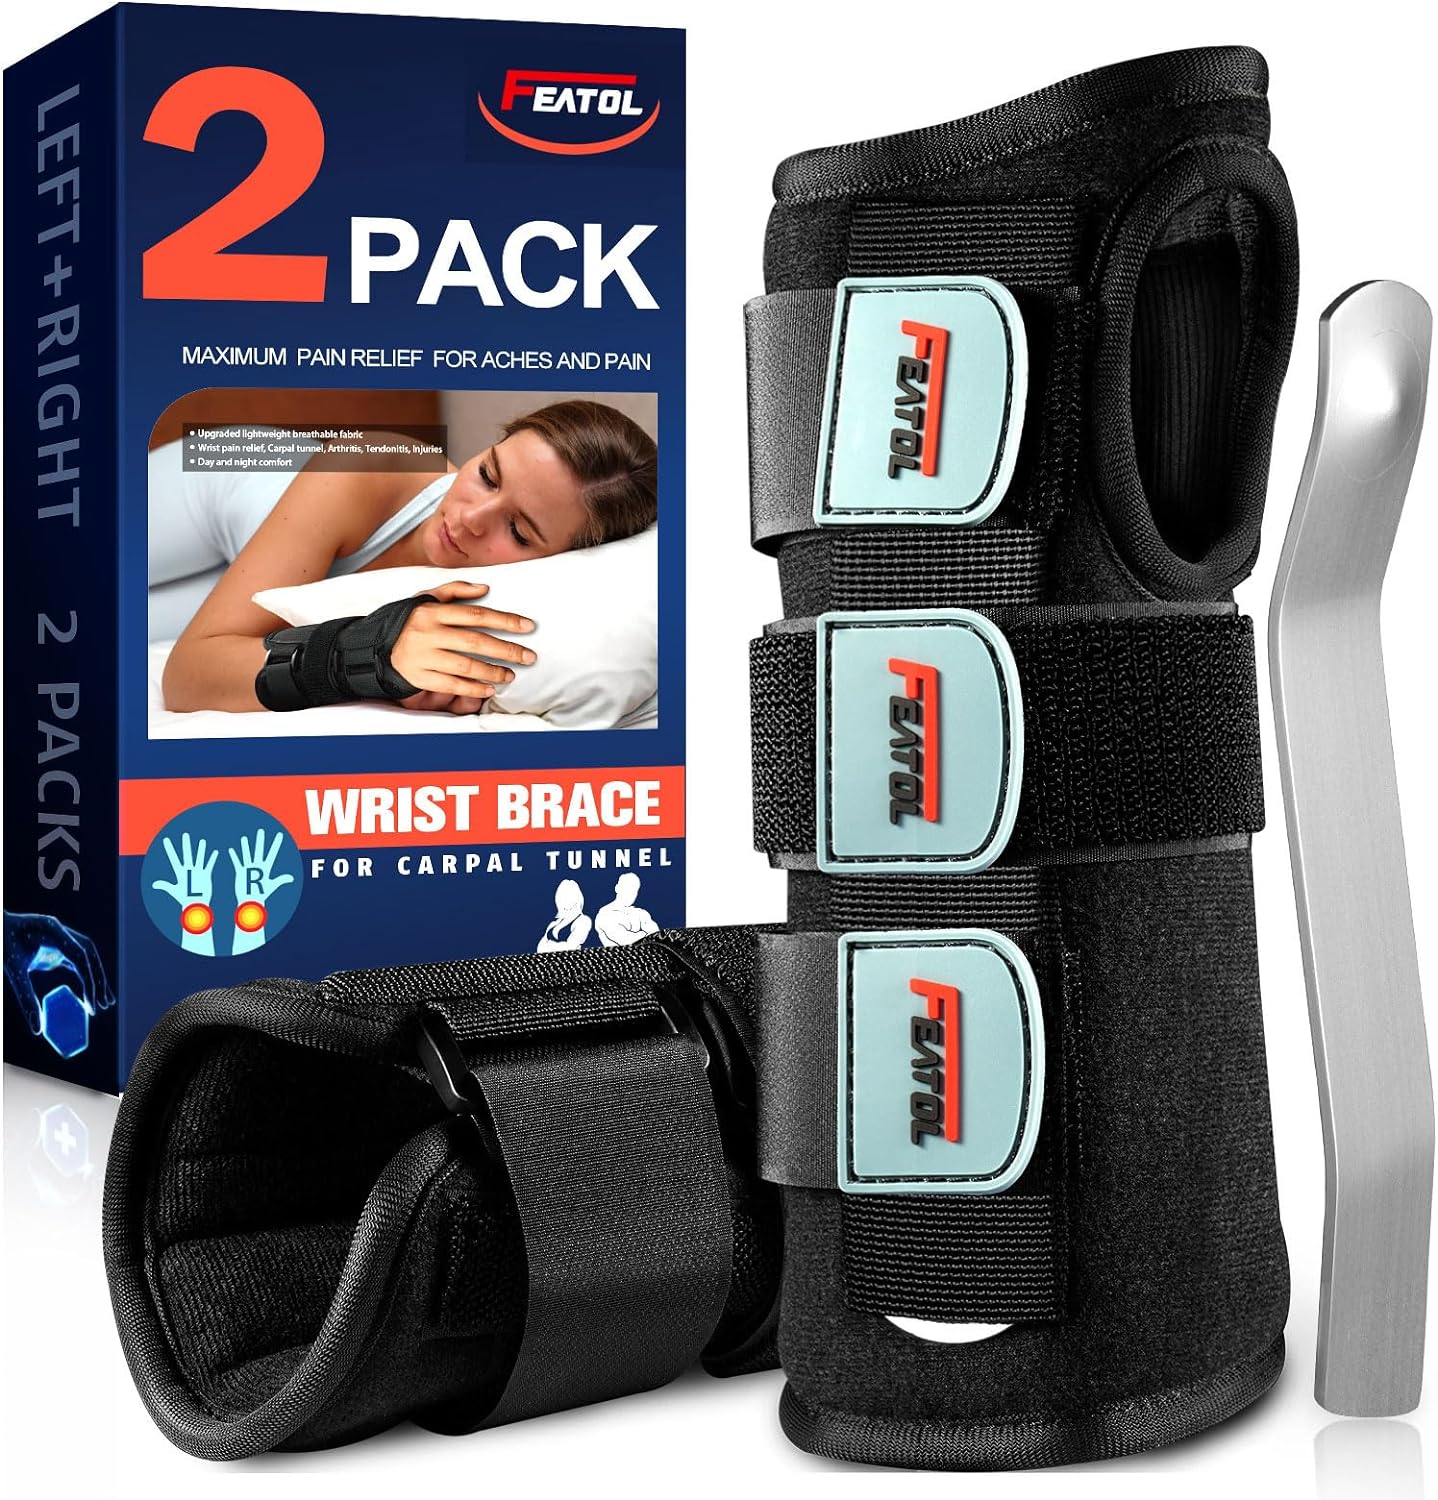 Adjustable Wrist Support Brace Review